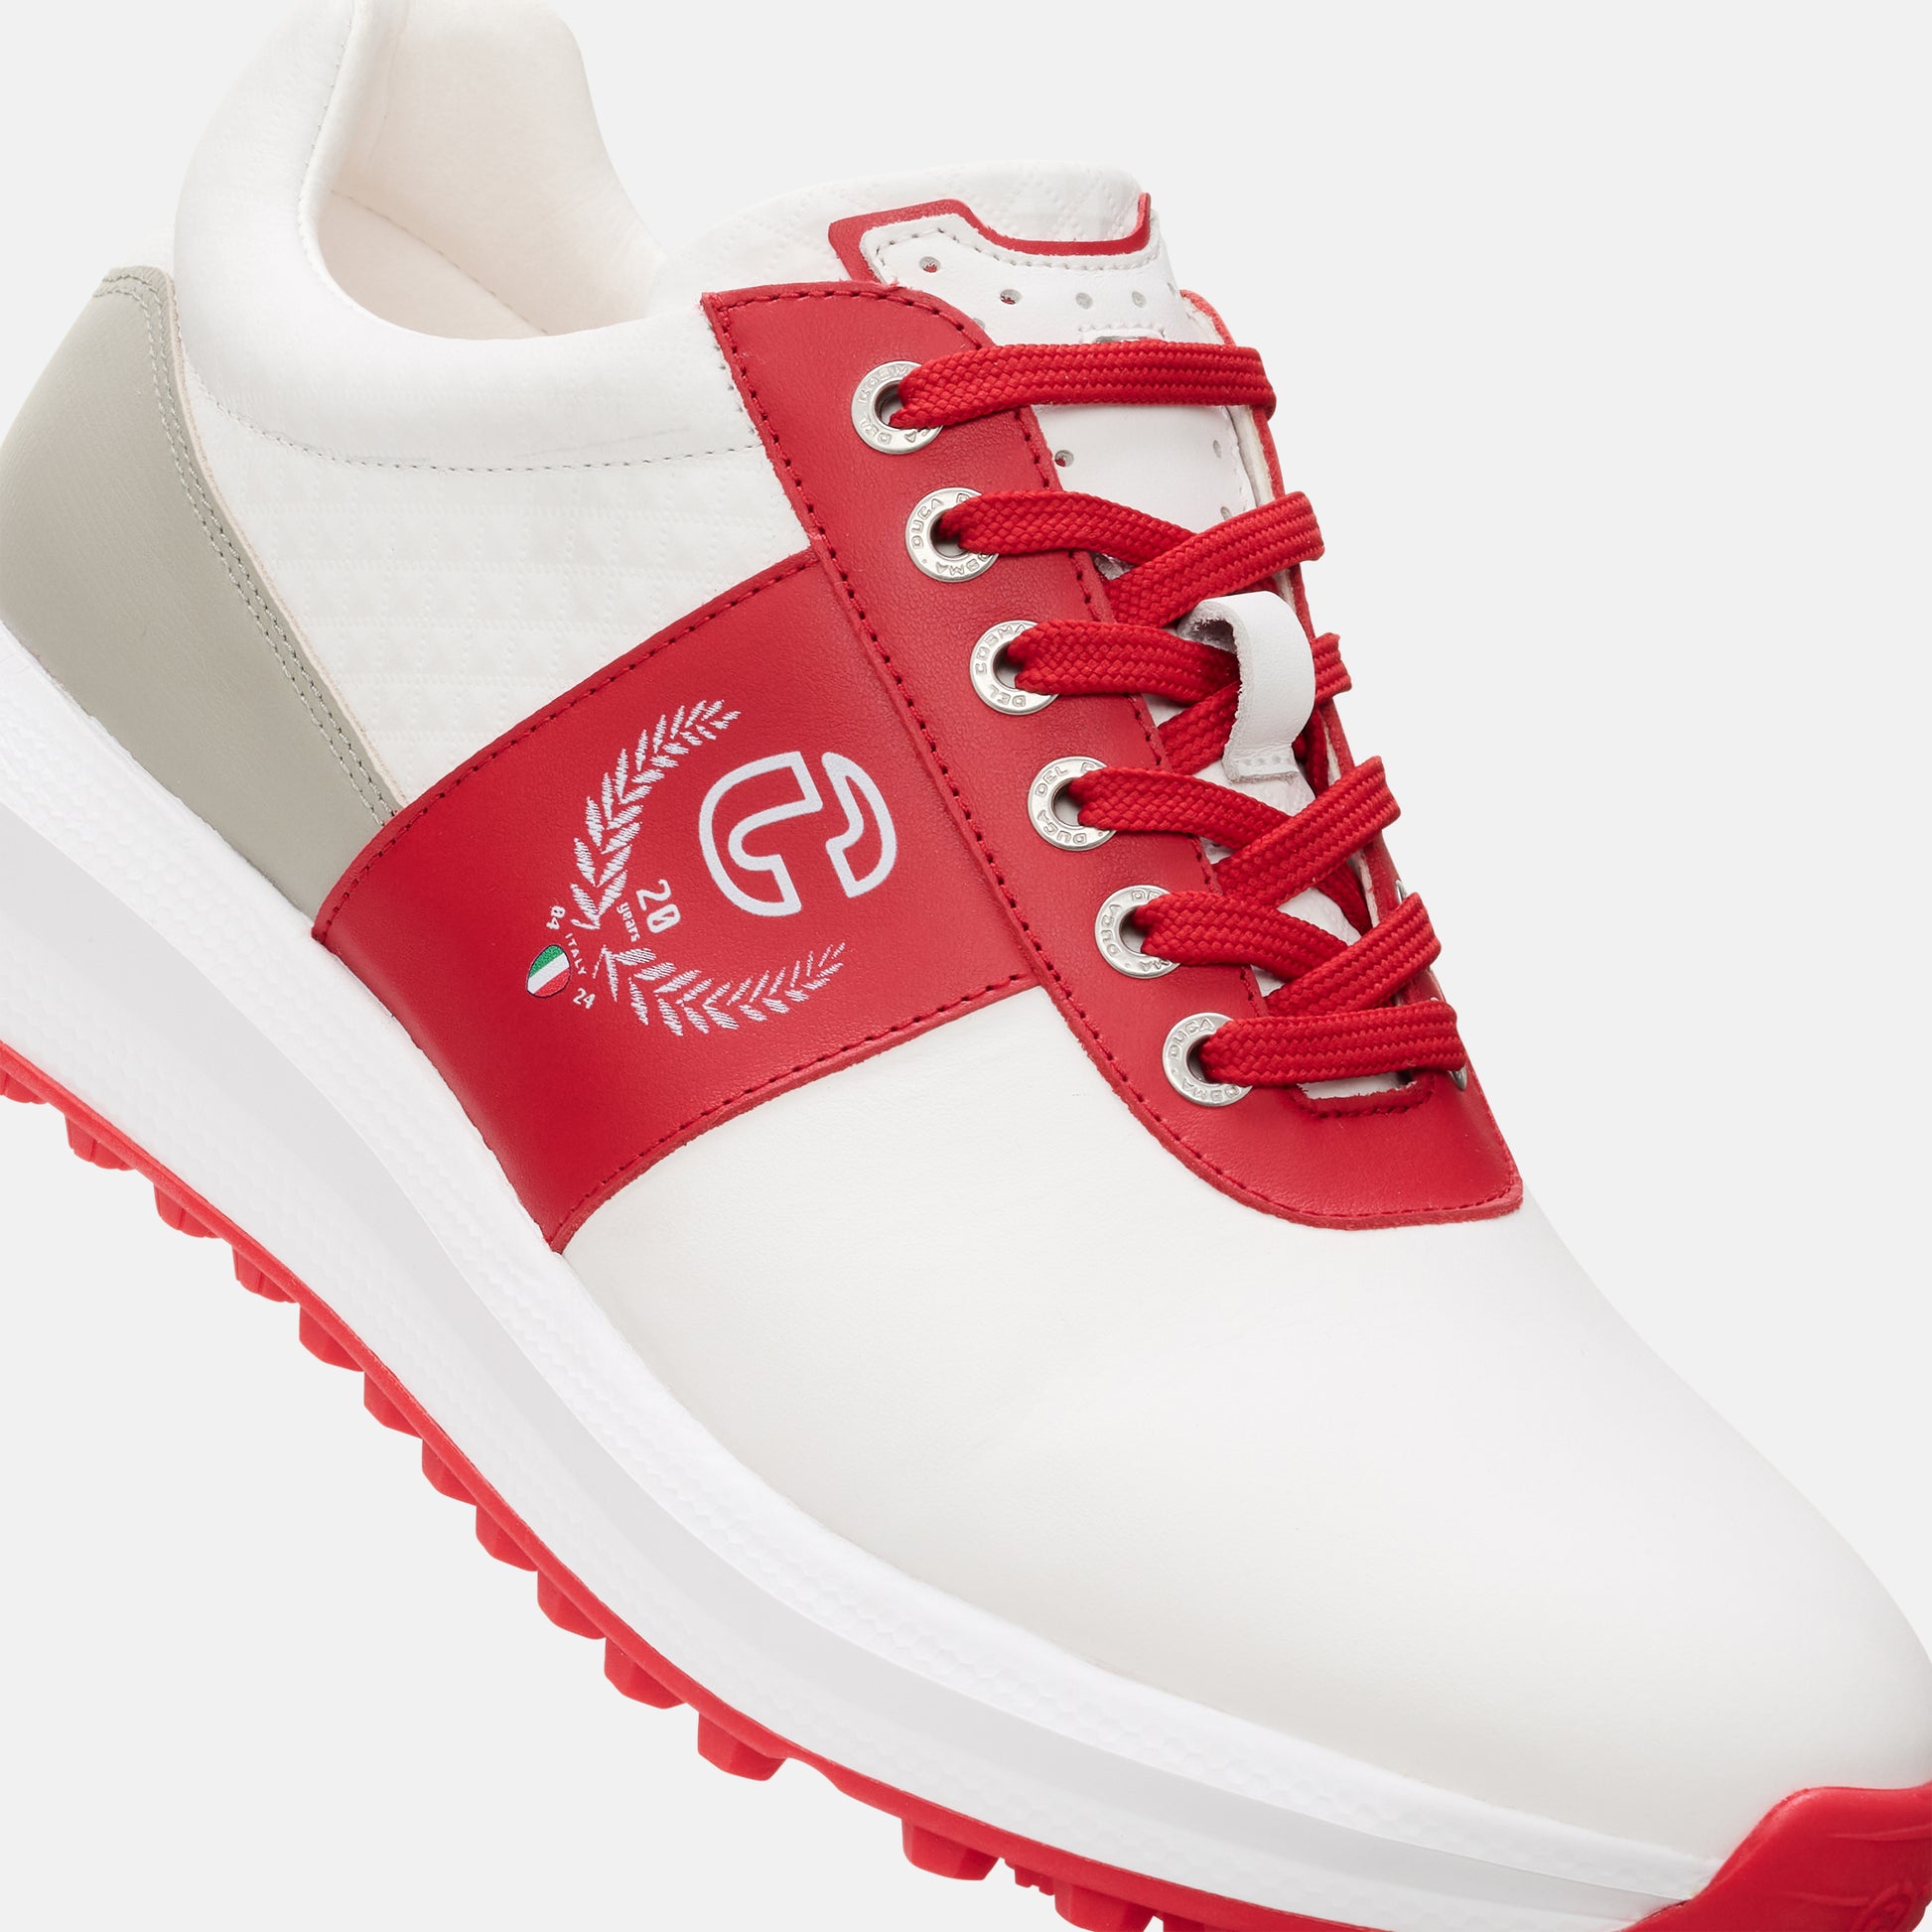 White Golf Shoes, Red Golf Shoes, Spikeless Golf Shoes, Waterproof Golf Shoes, Lightweight Golf Shoes, Duca del Cosma Men's Golf Shoes.